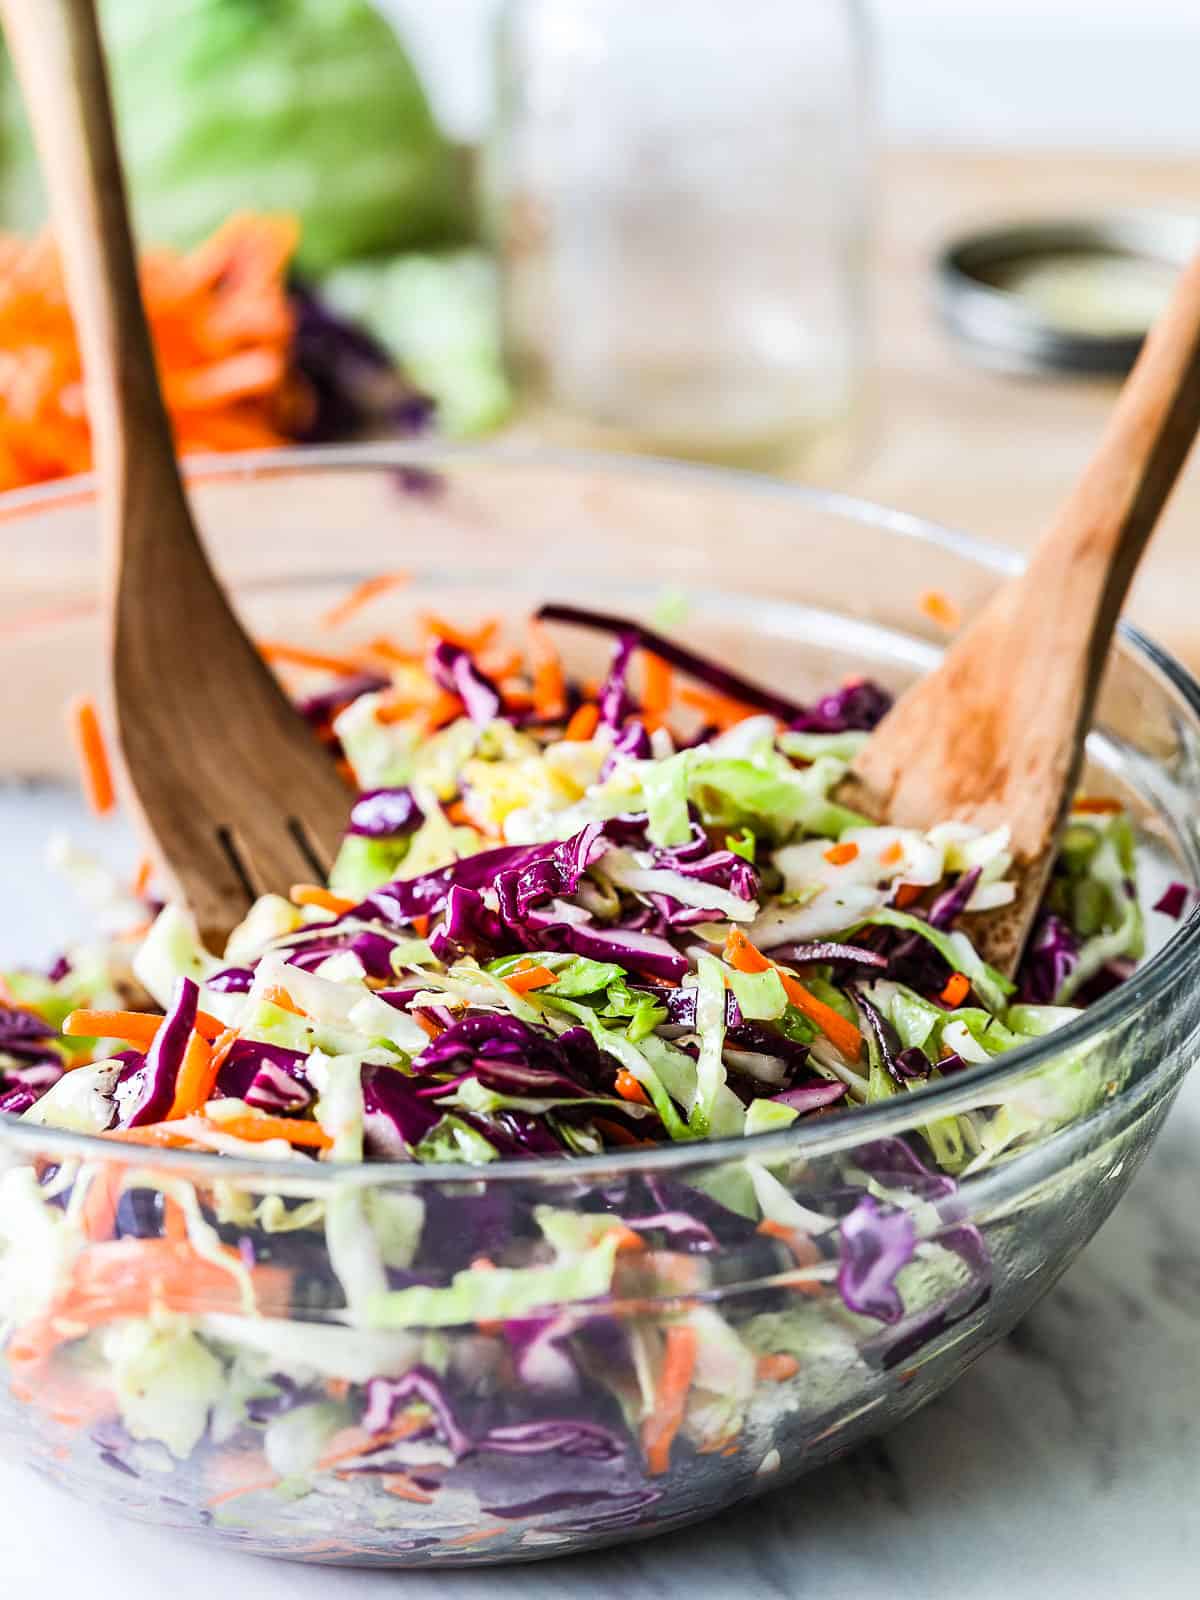 A large clear bowl filled with colorful cole slaw made with purple and green cabbage and carrots with wood serving tongs.